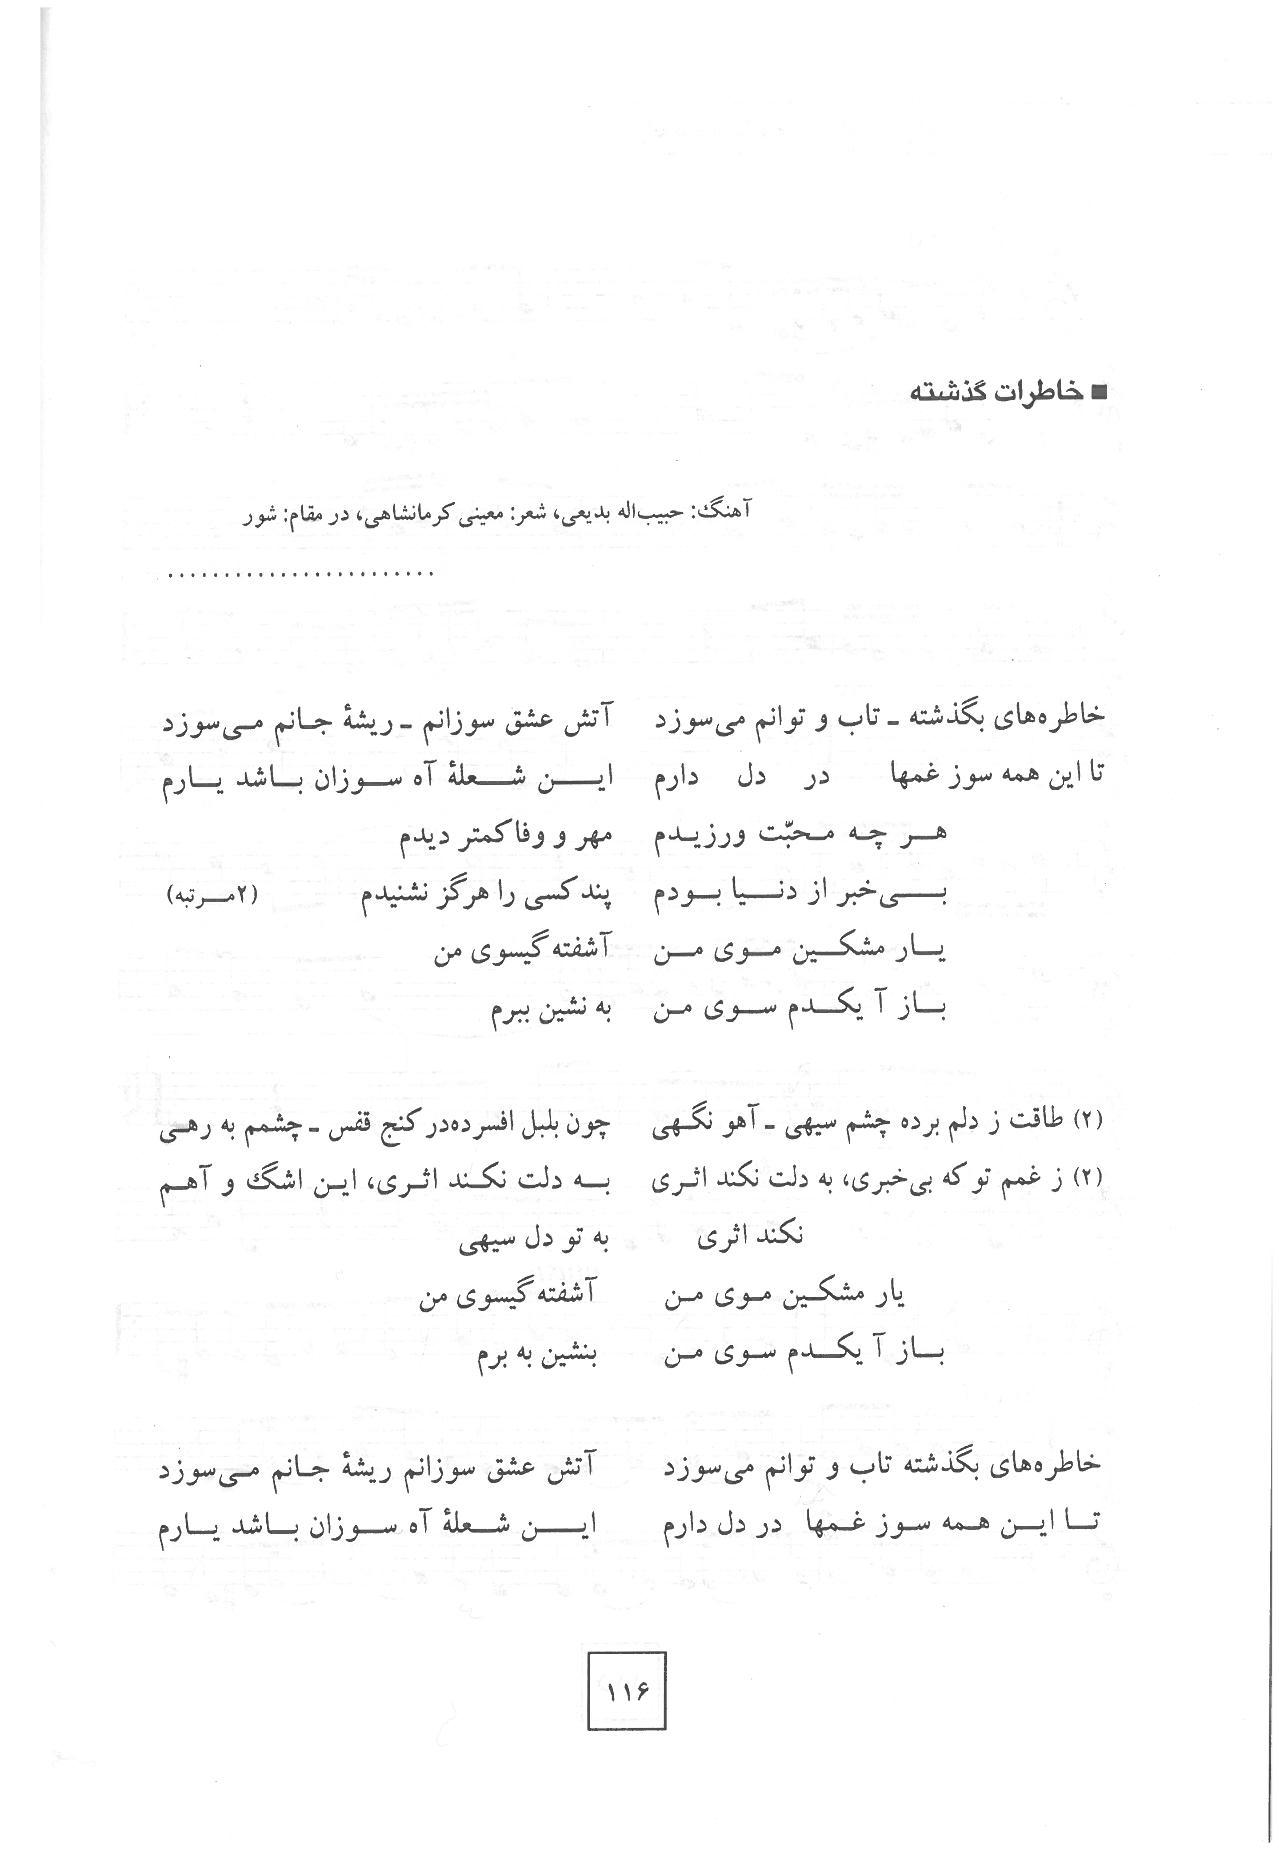 A page of arabic writing with some text